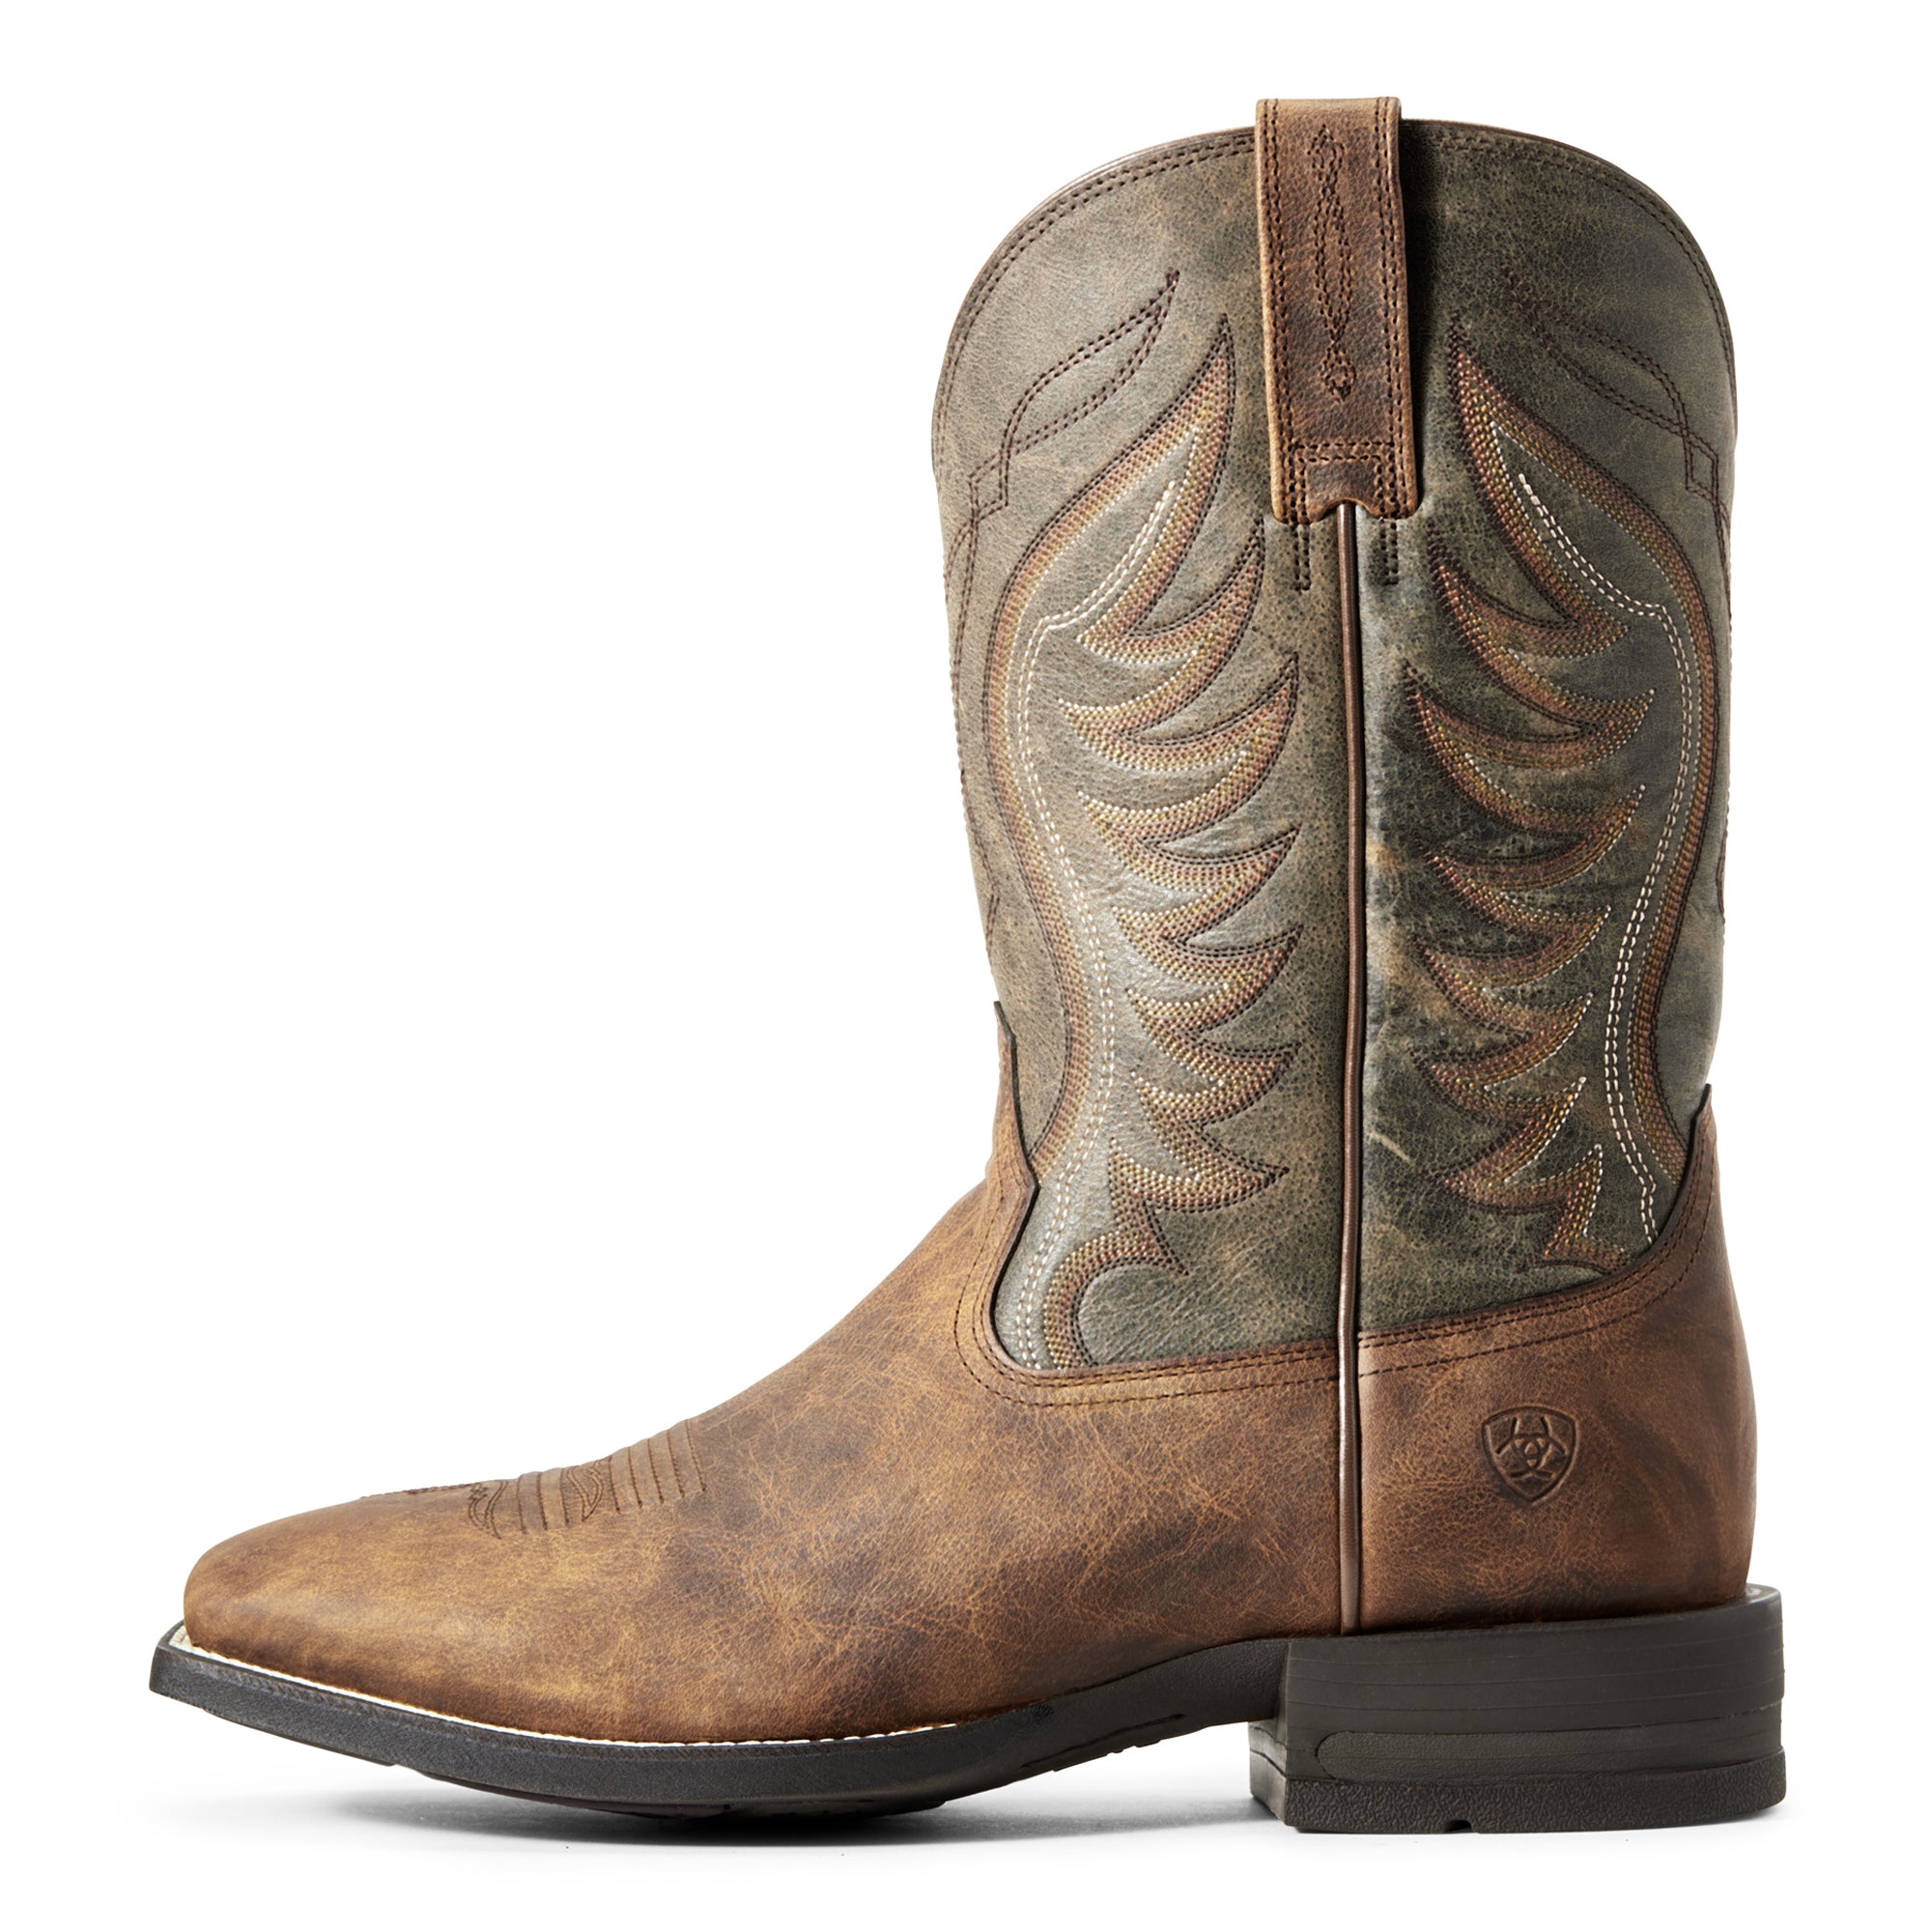 Ariat Amos Western Boot